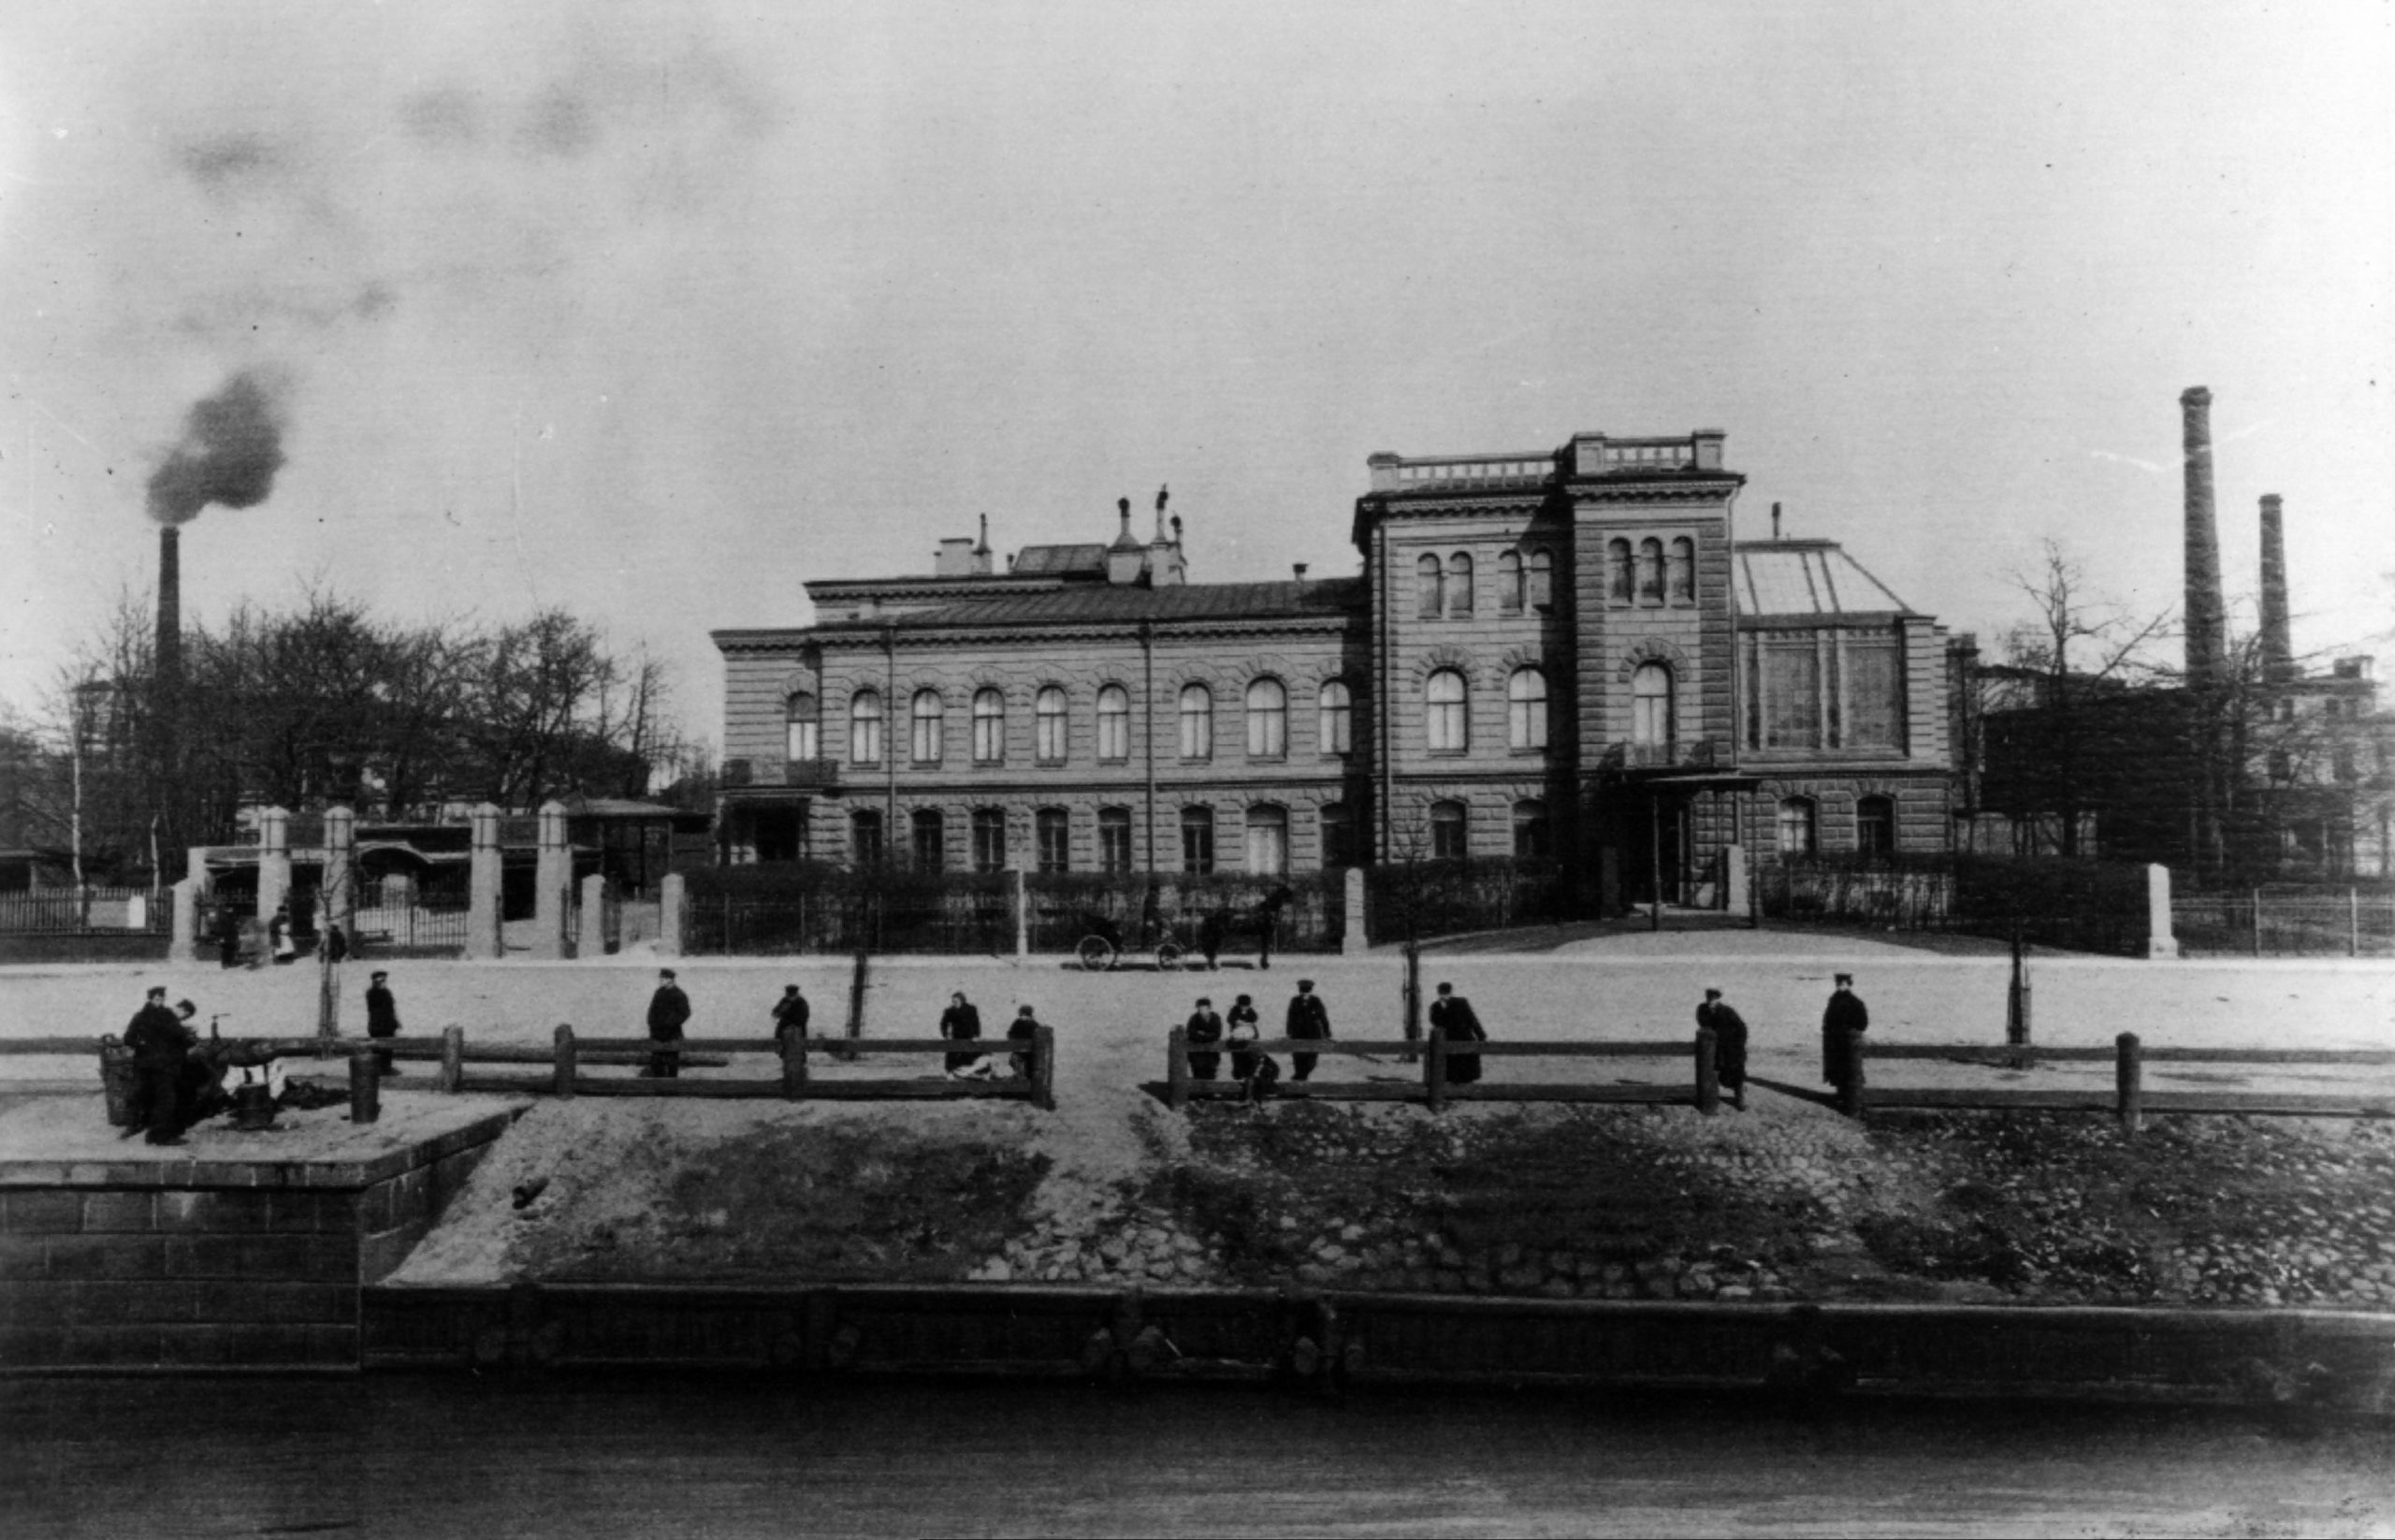 The Engineering Works of Ludvig Nobel in St Petersburg initially primarily produced arms, but the production of working machines like lathes, planing-machines, hydraulic presses and steam hammers continued during the 1870s.